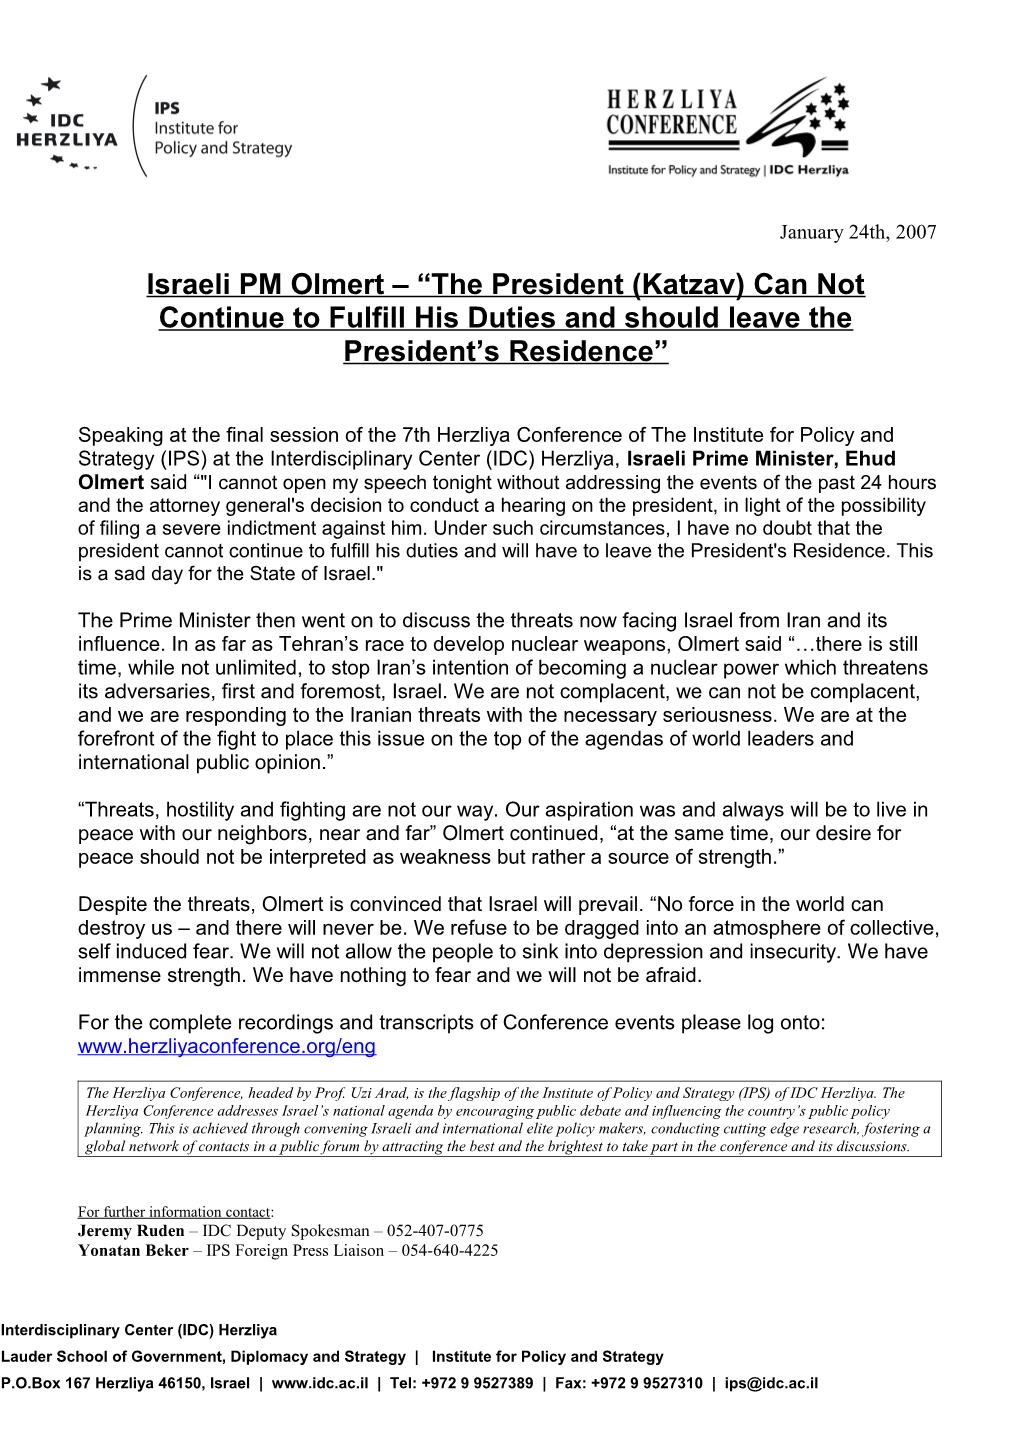 Israeli PM Olmert the President (Katzav) Can Not Continue to Fulfill His Duties and Should